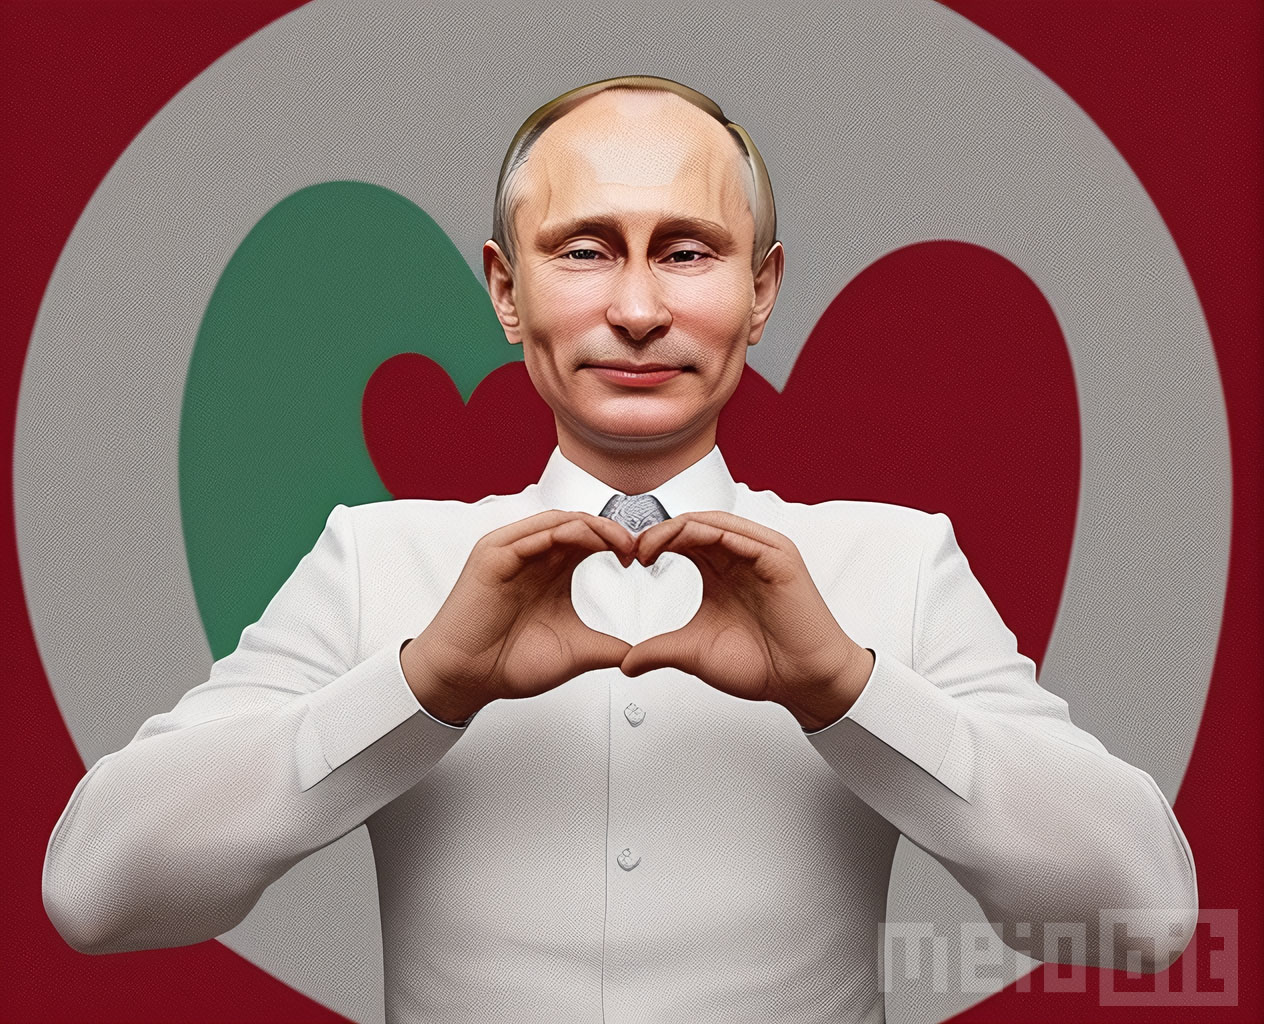 Prompt: Smiling Vladmir Putin Making Heart Shape with Her HandsDetalhes: Steps: 20, Sampler: Euler a, CFG scale: 7, Seed: 2896531791, Size: 632x512, Model hash: 423e602e32, Model: clarity_clarity14-0038-0869-0679, Denoising strength: 0.7, ControlNet Enabled: True, ControlNet Preprocessor: openpose, ControlNet Model: control_openpose-fp16 [9ca67cc5], ControlNet Weight: 1, ControlNet Starting Step: 0, ControlNet Ending Step: 1, ControlNet Resize Mode: Crop and Resize, ControlNet Pixel Perfect: False, ControlNet Control Mode: Balanced, ControlNet Preprocessor Parameters: "(512, 100, 200)", Hires upscale: 2, Hires upscaler: Latent